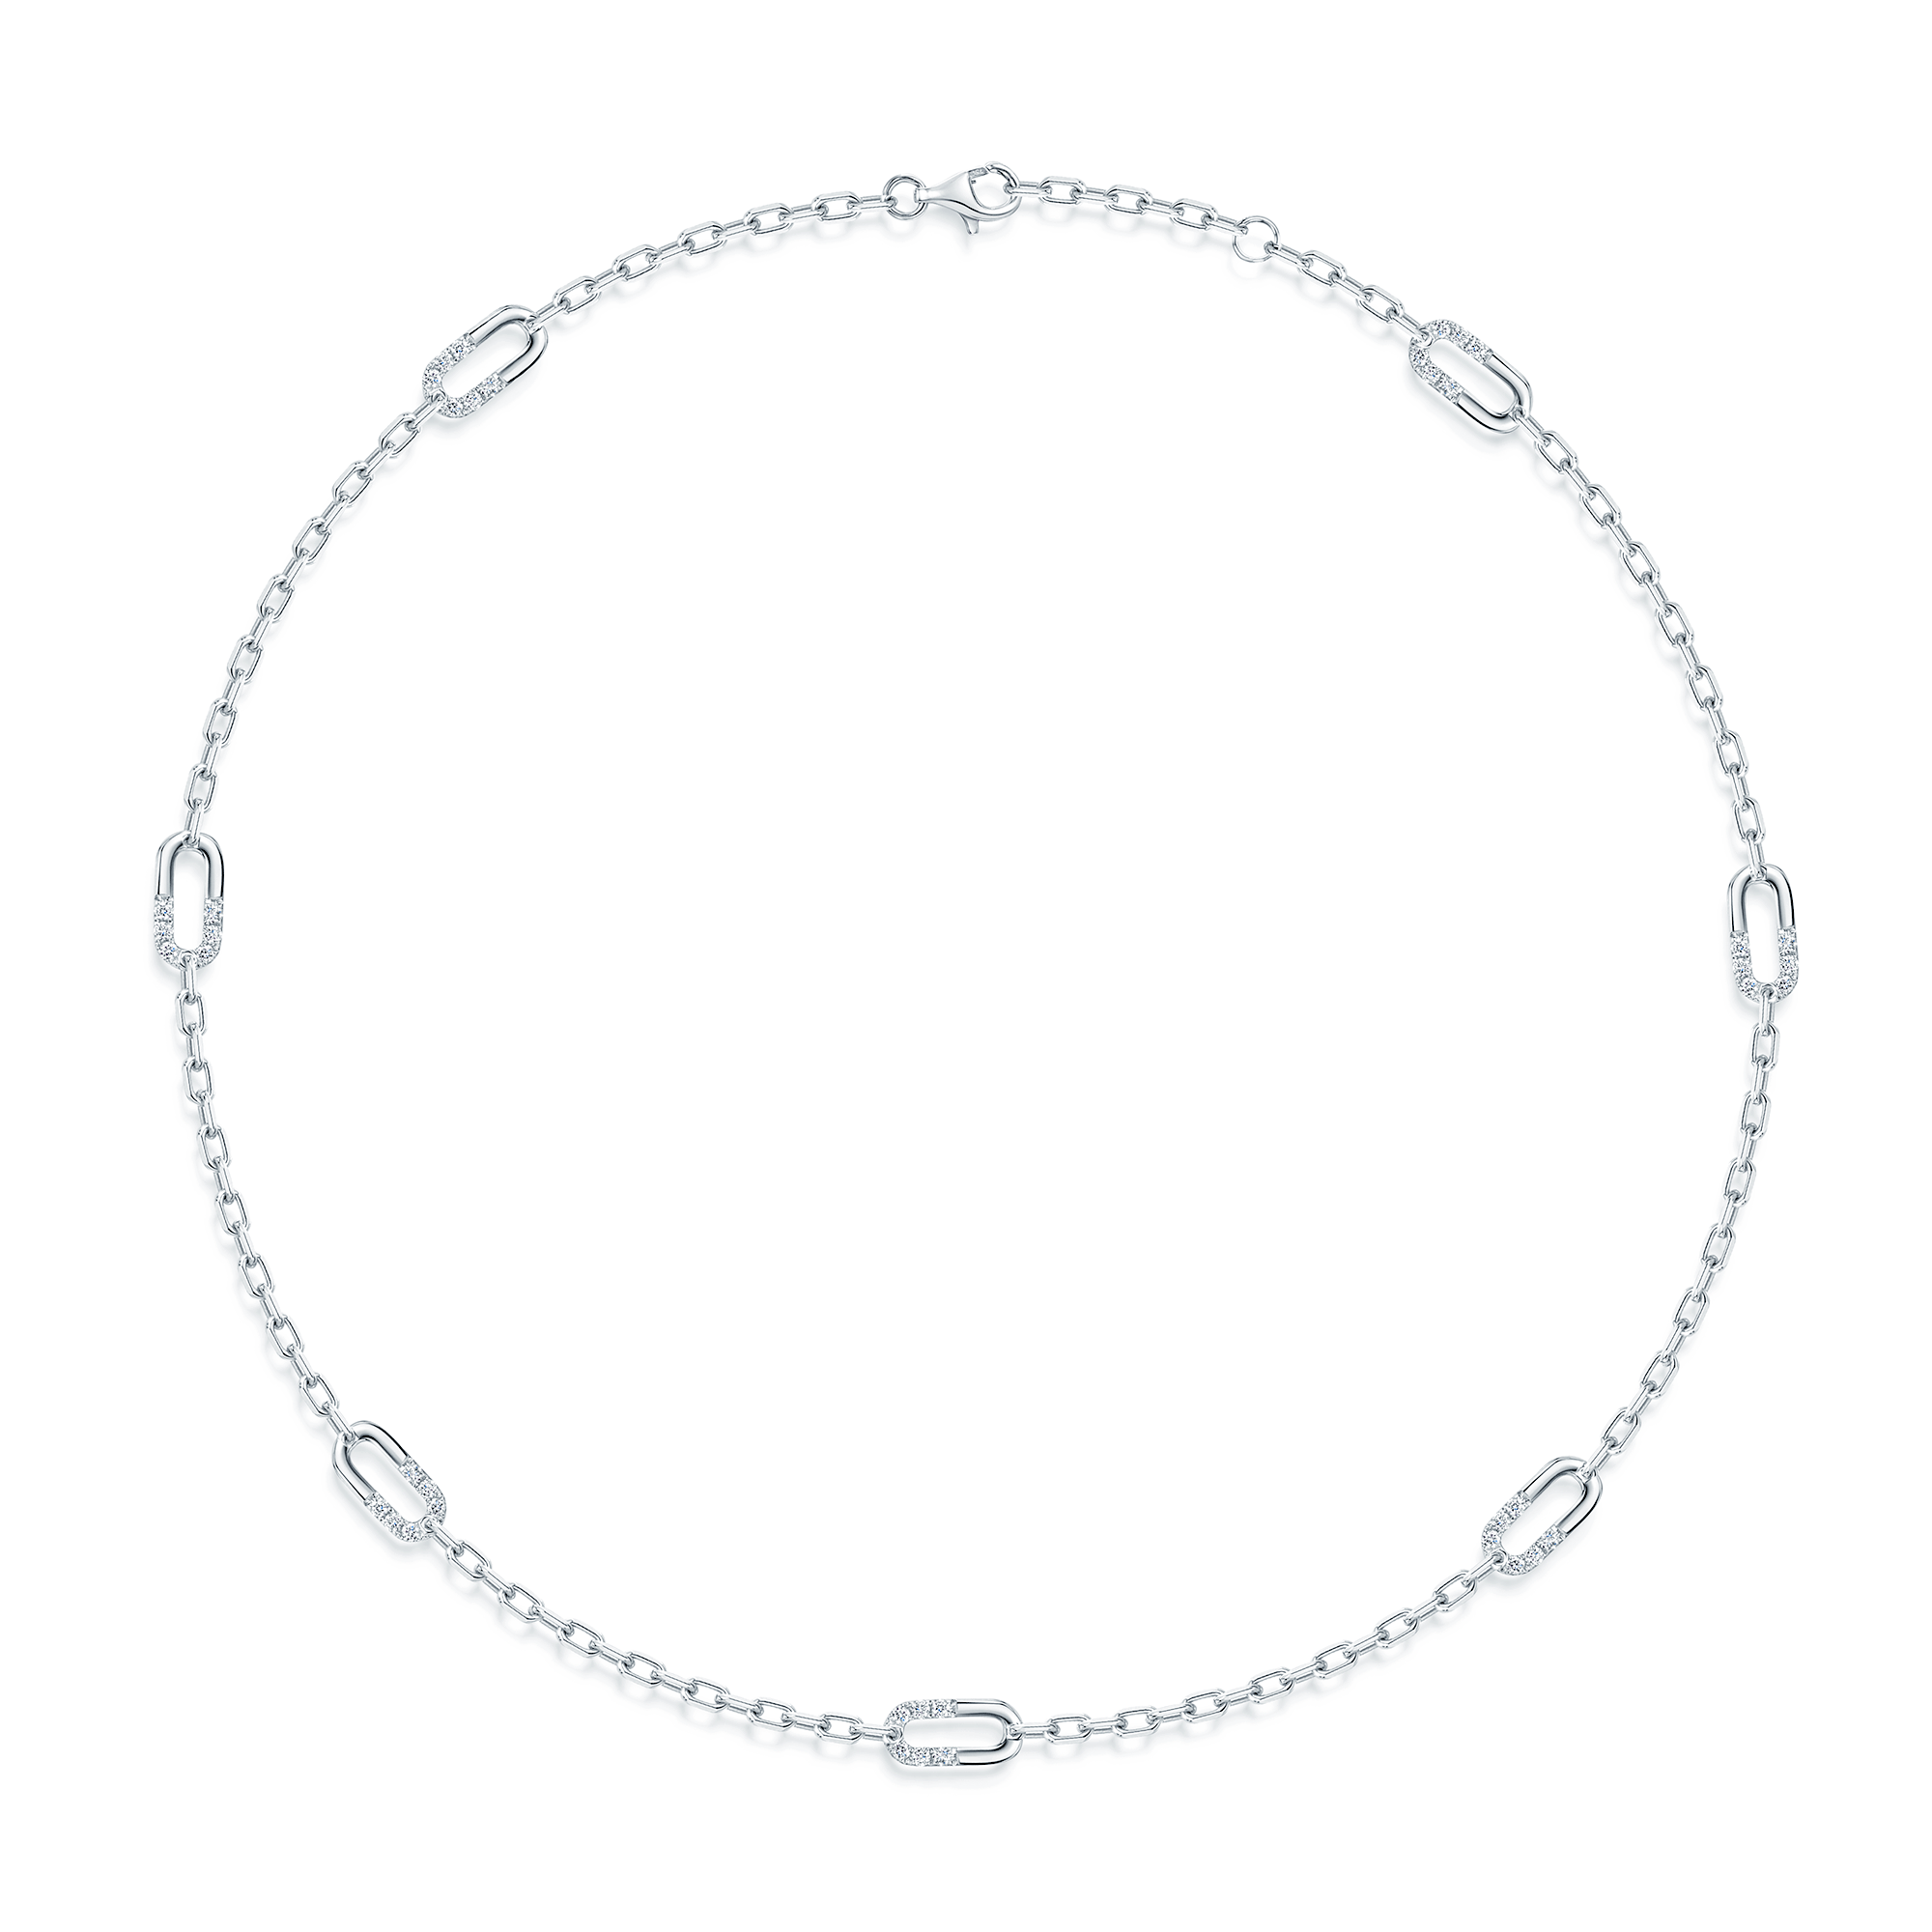 Verve Collection 18ct White Gold Diamond Loop Necklace